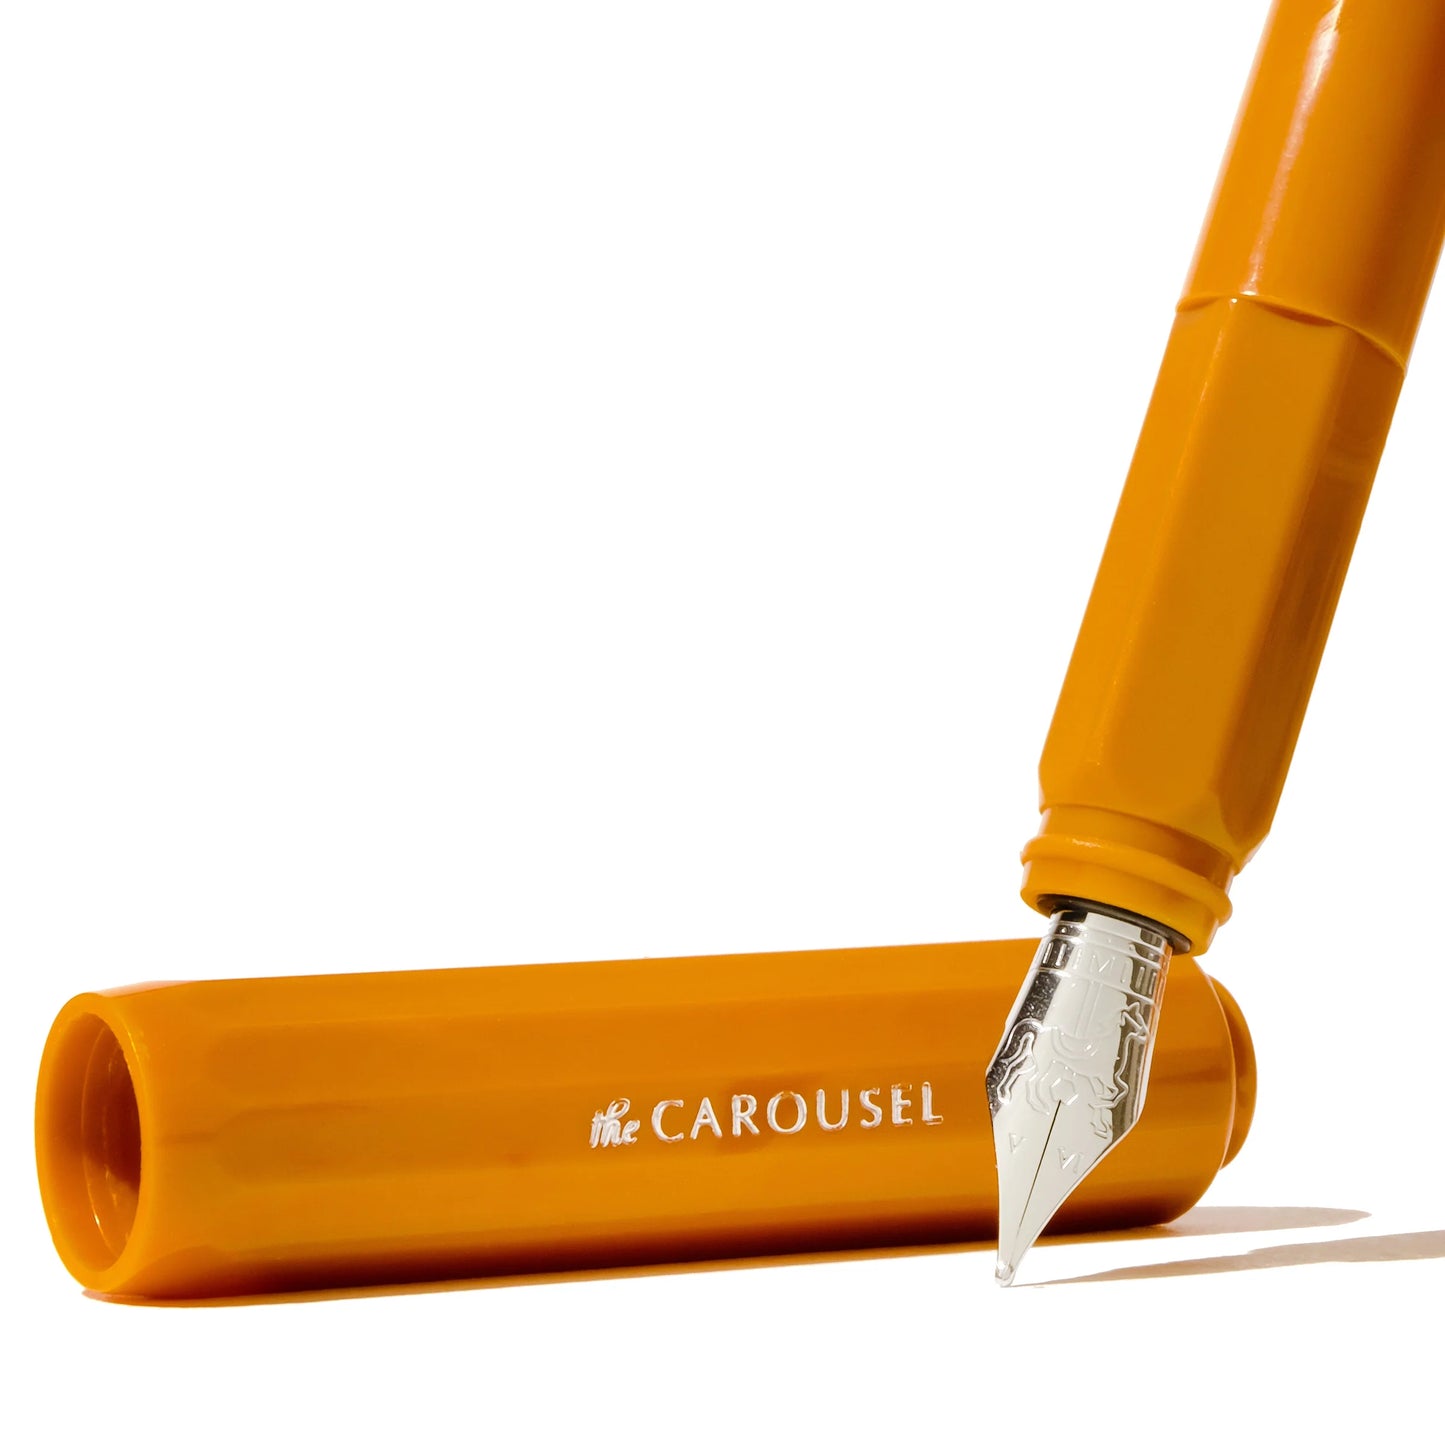 Ferris Wheel Press - Hearty Harvest Limited Edition - The Carousel Fountain Pen